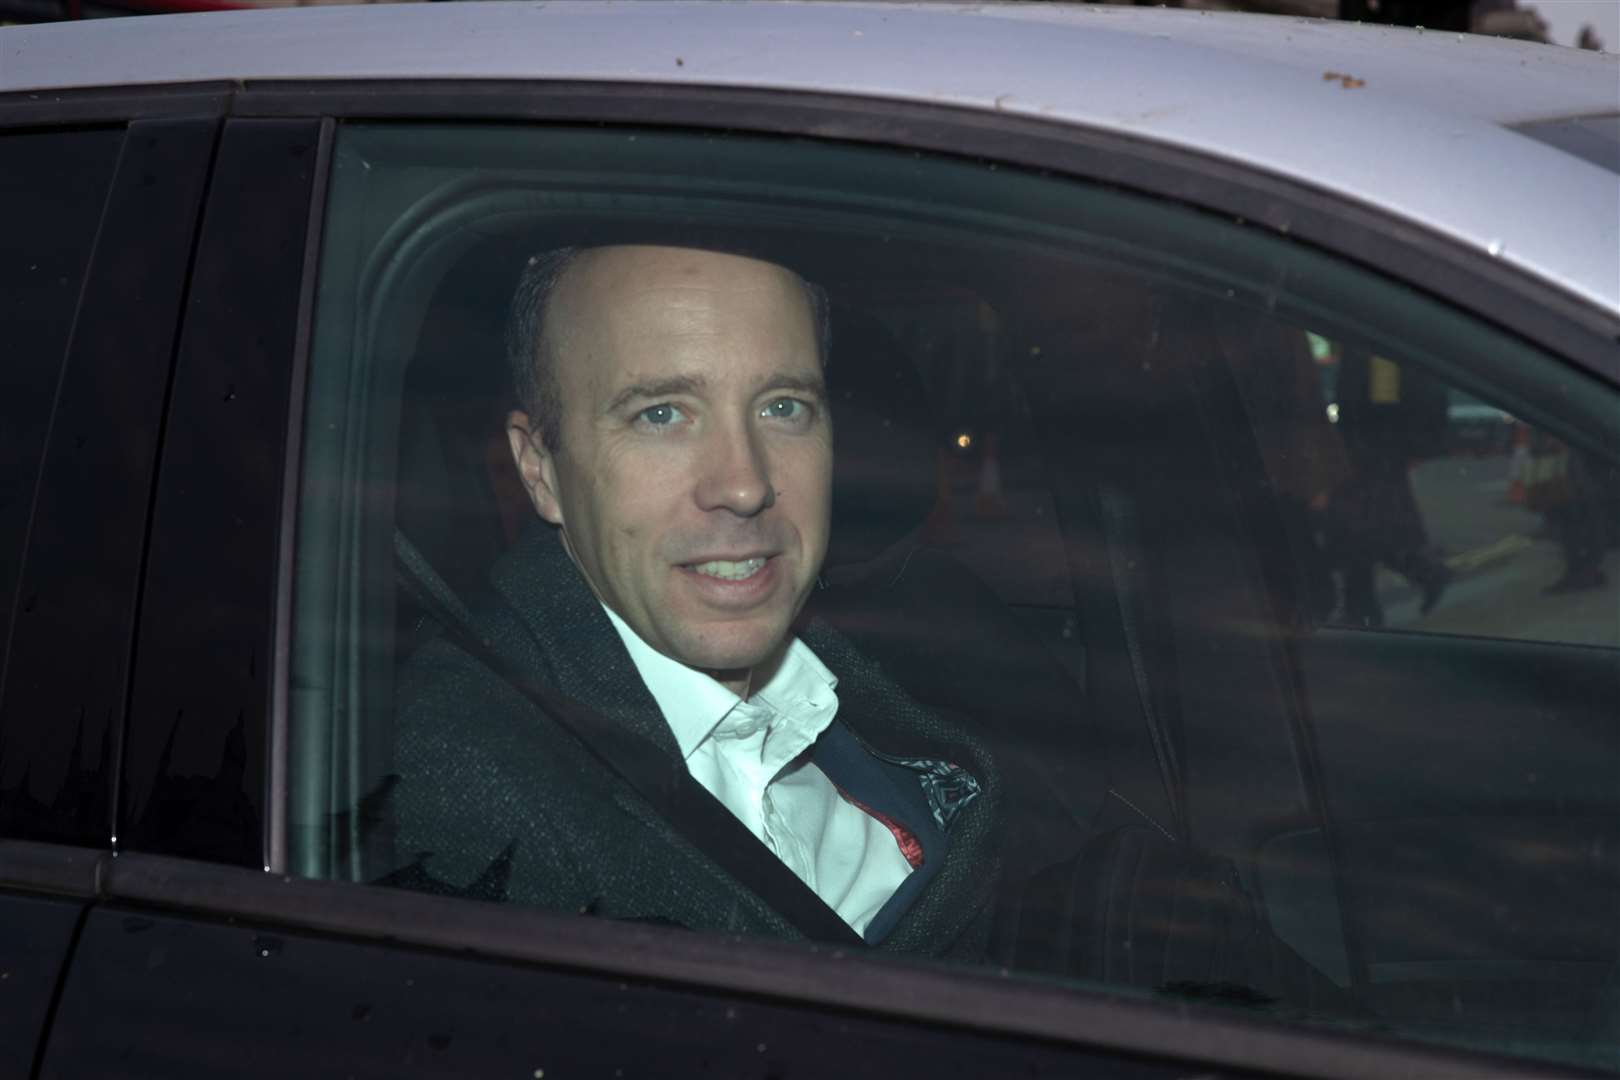 Matt Hancock returns to the Houses of Parliament in London, for first time since his I’m A Celebrity appearance (Lucy North/PA)